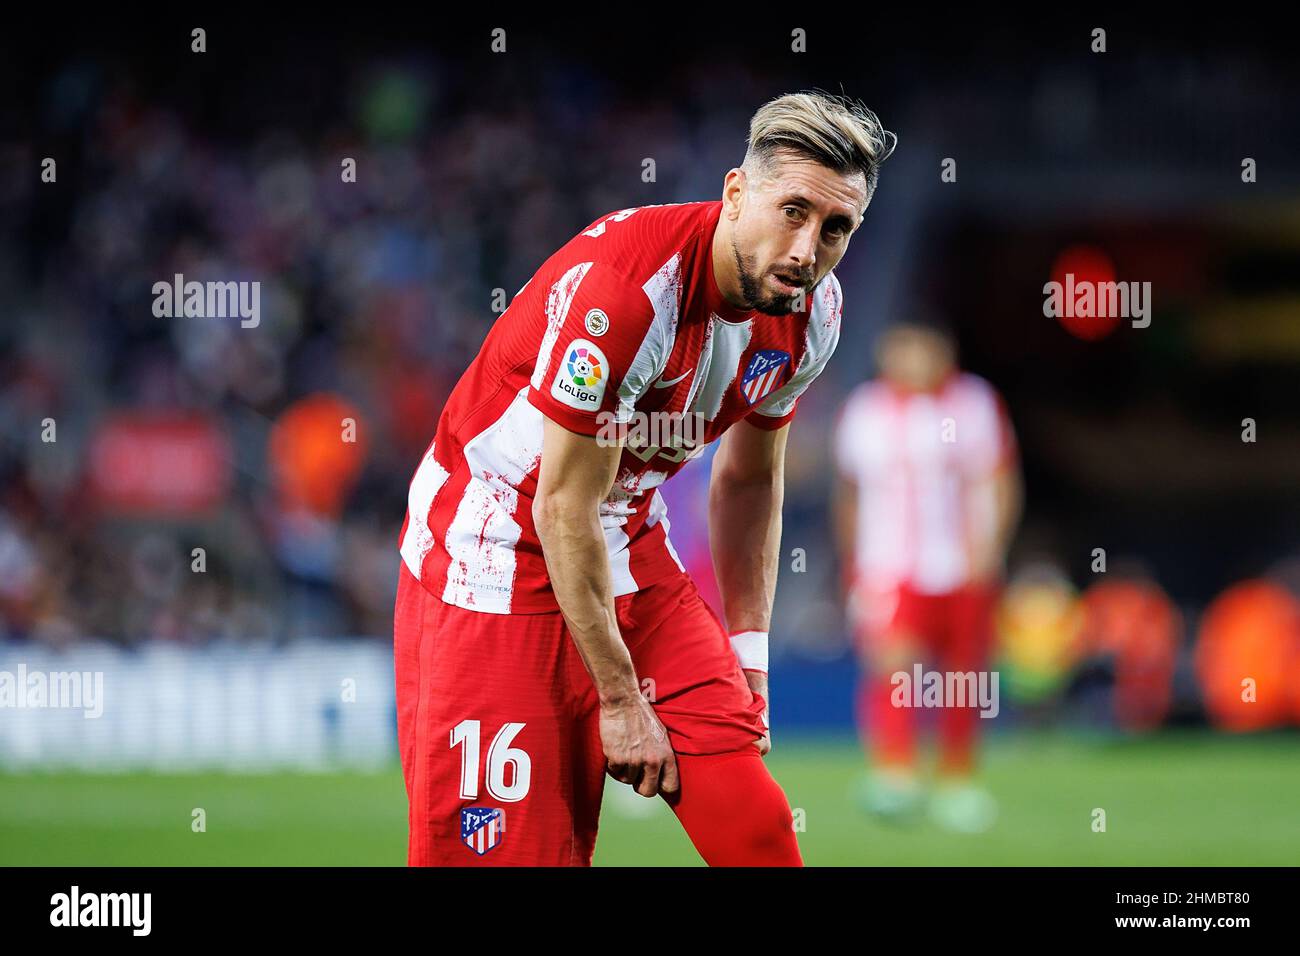 BARCELONA - FEB 6: Hector Herrera in action during the La Liga match between FC Barcelona and Club Atletico de Madrid at the Camp Nou Stadium on Febru Stock Photo